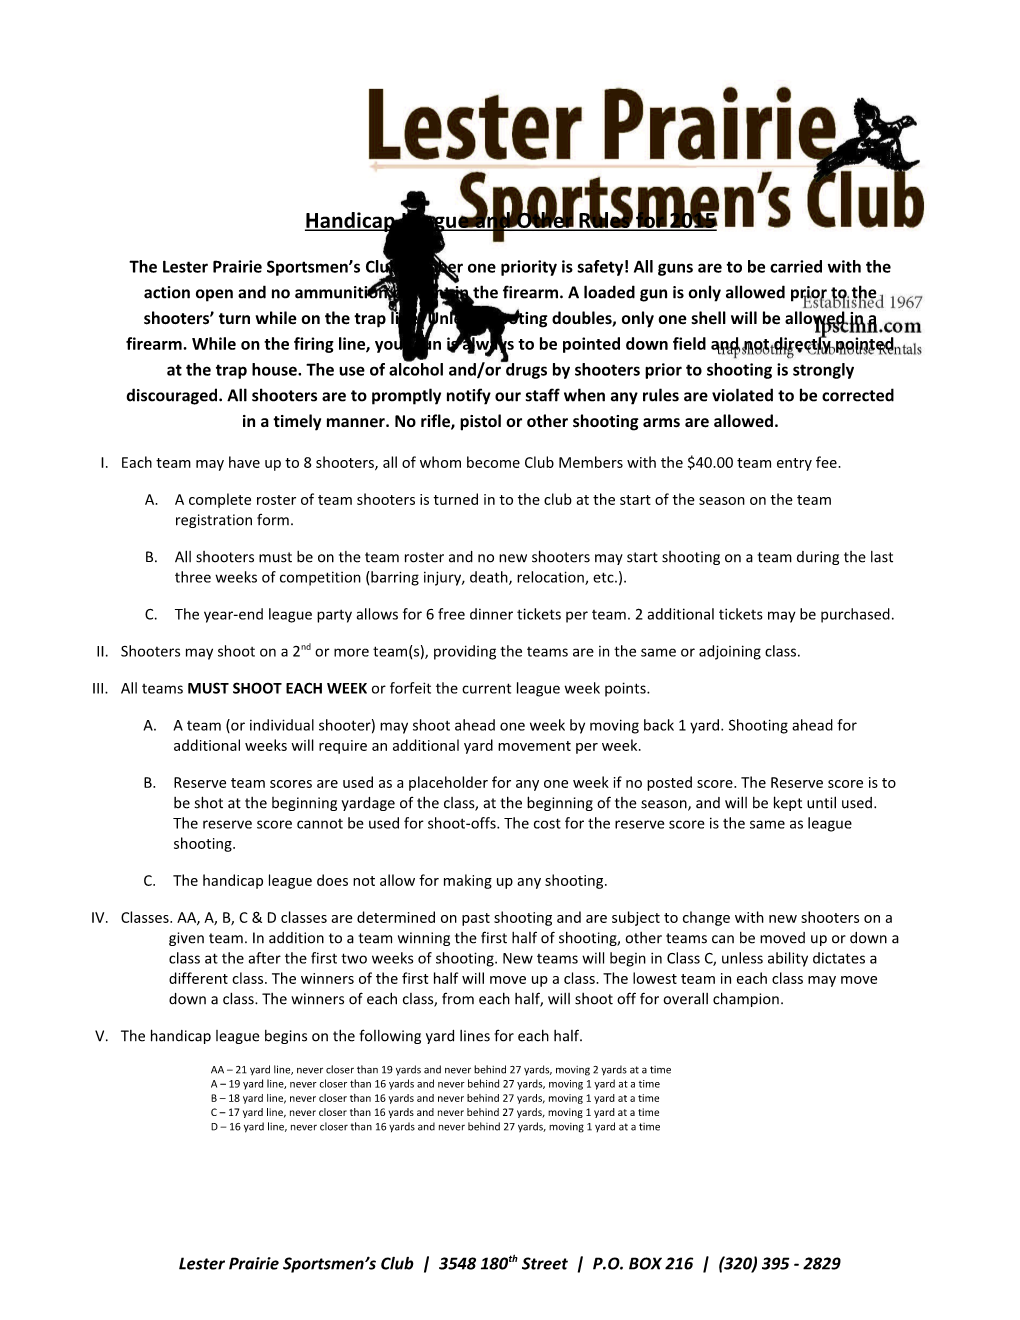 Handicap League and Other Rules for 2015